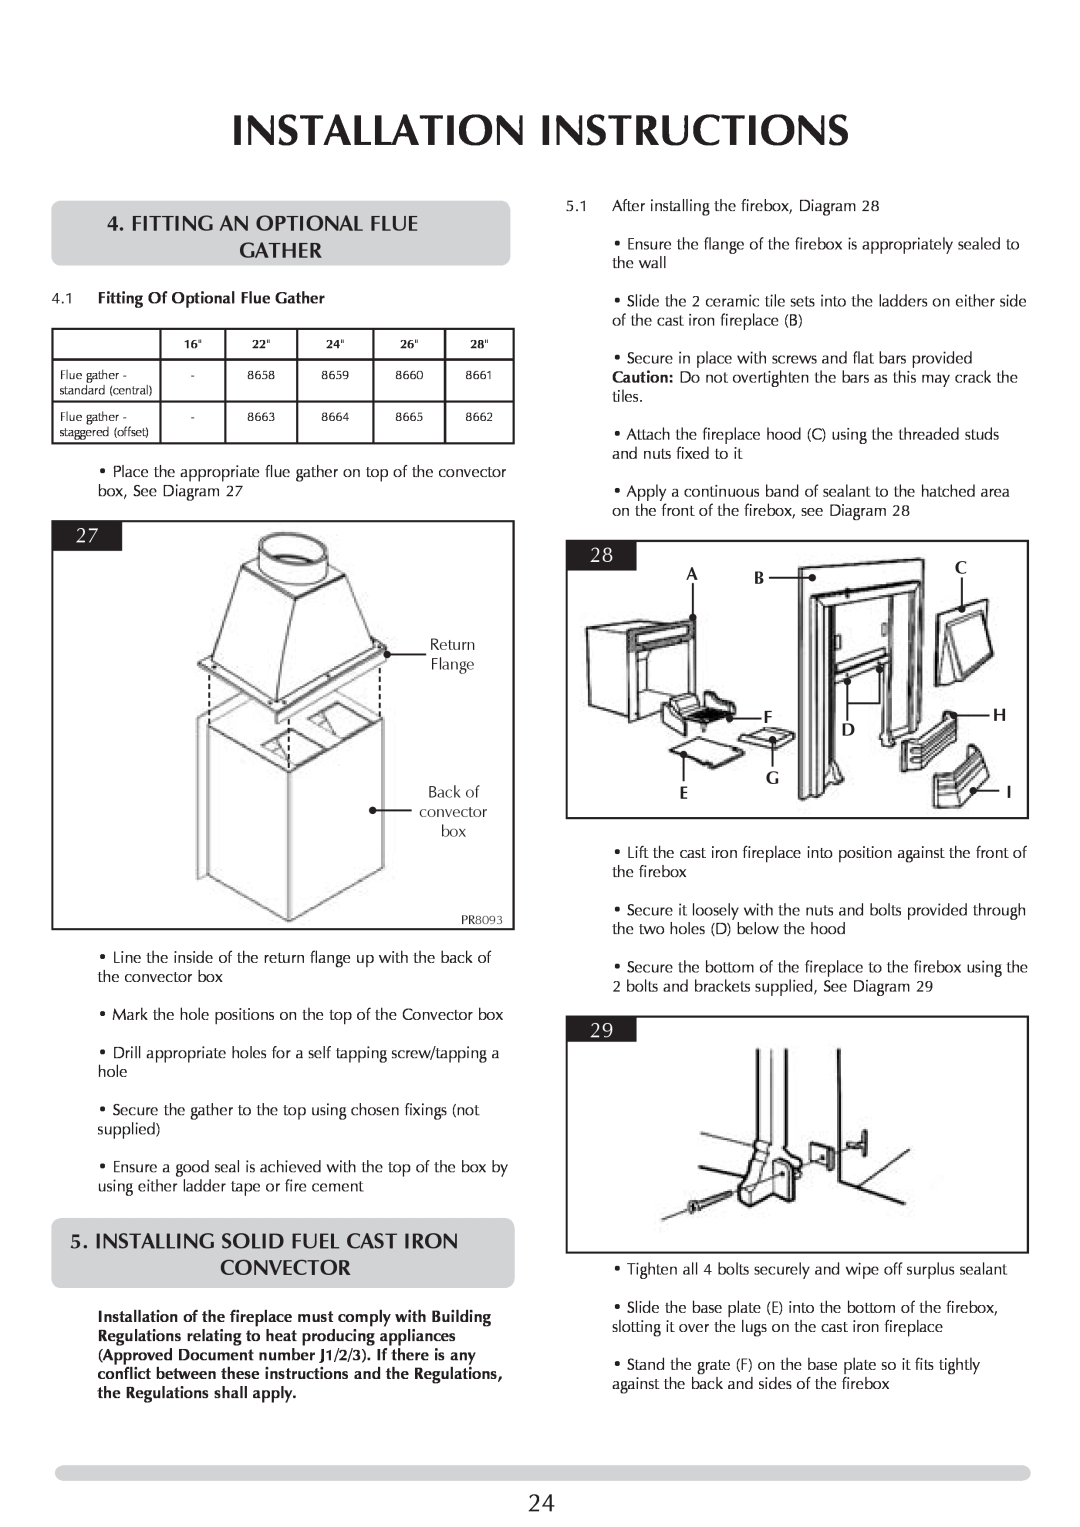 Stovax PM219 manual Fitting an optional flue Gather, Installing Solid fuel cast iron Convector, Installation Instructions 